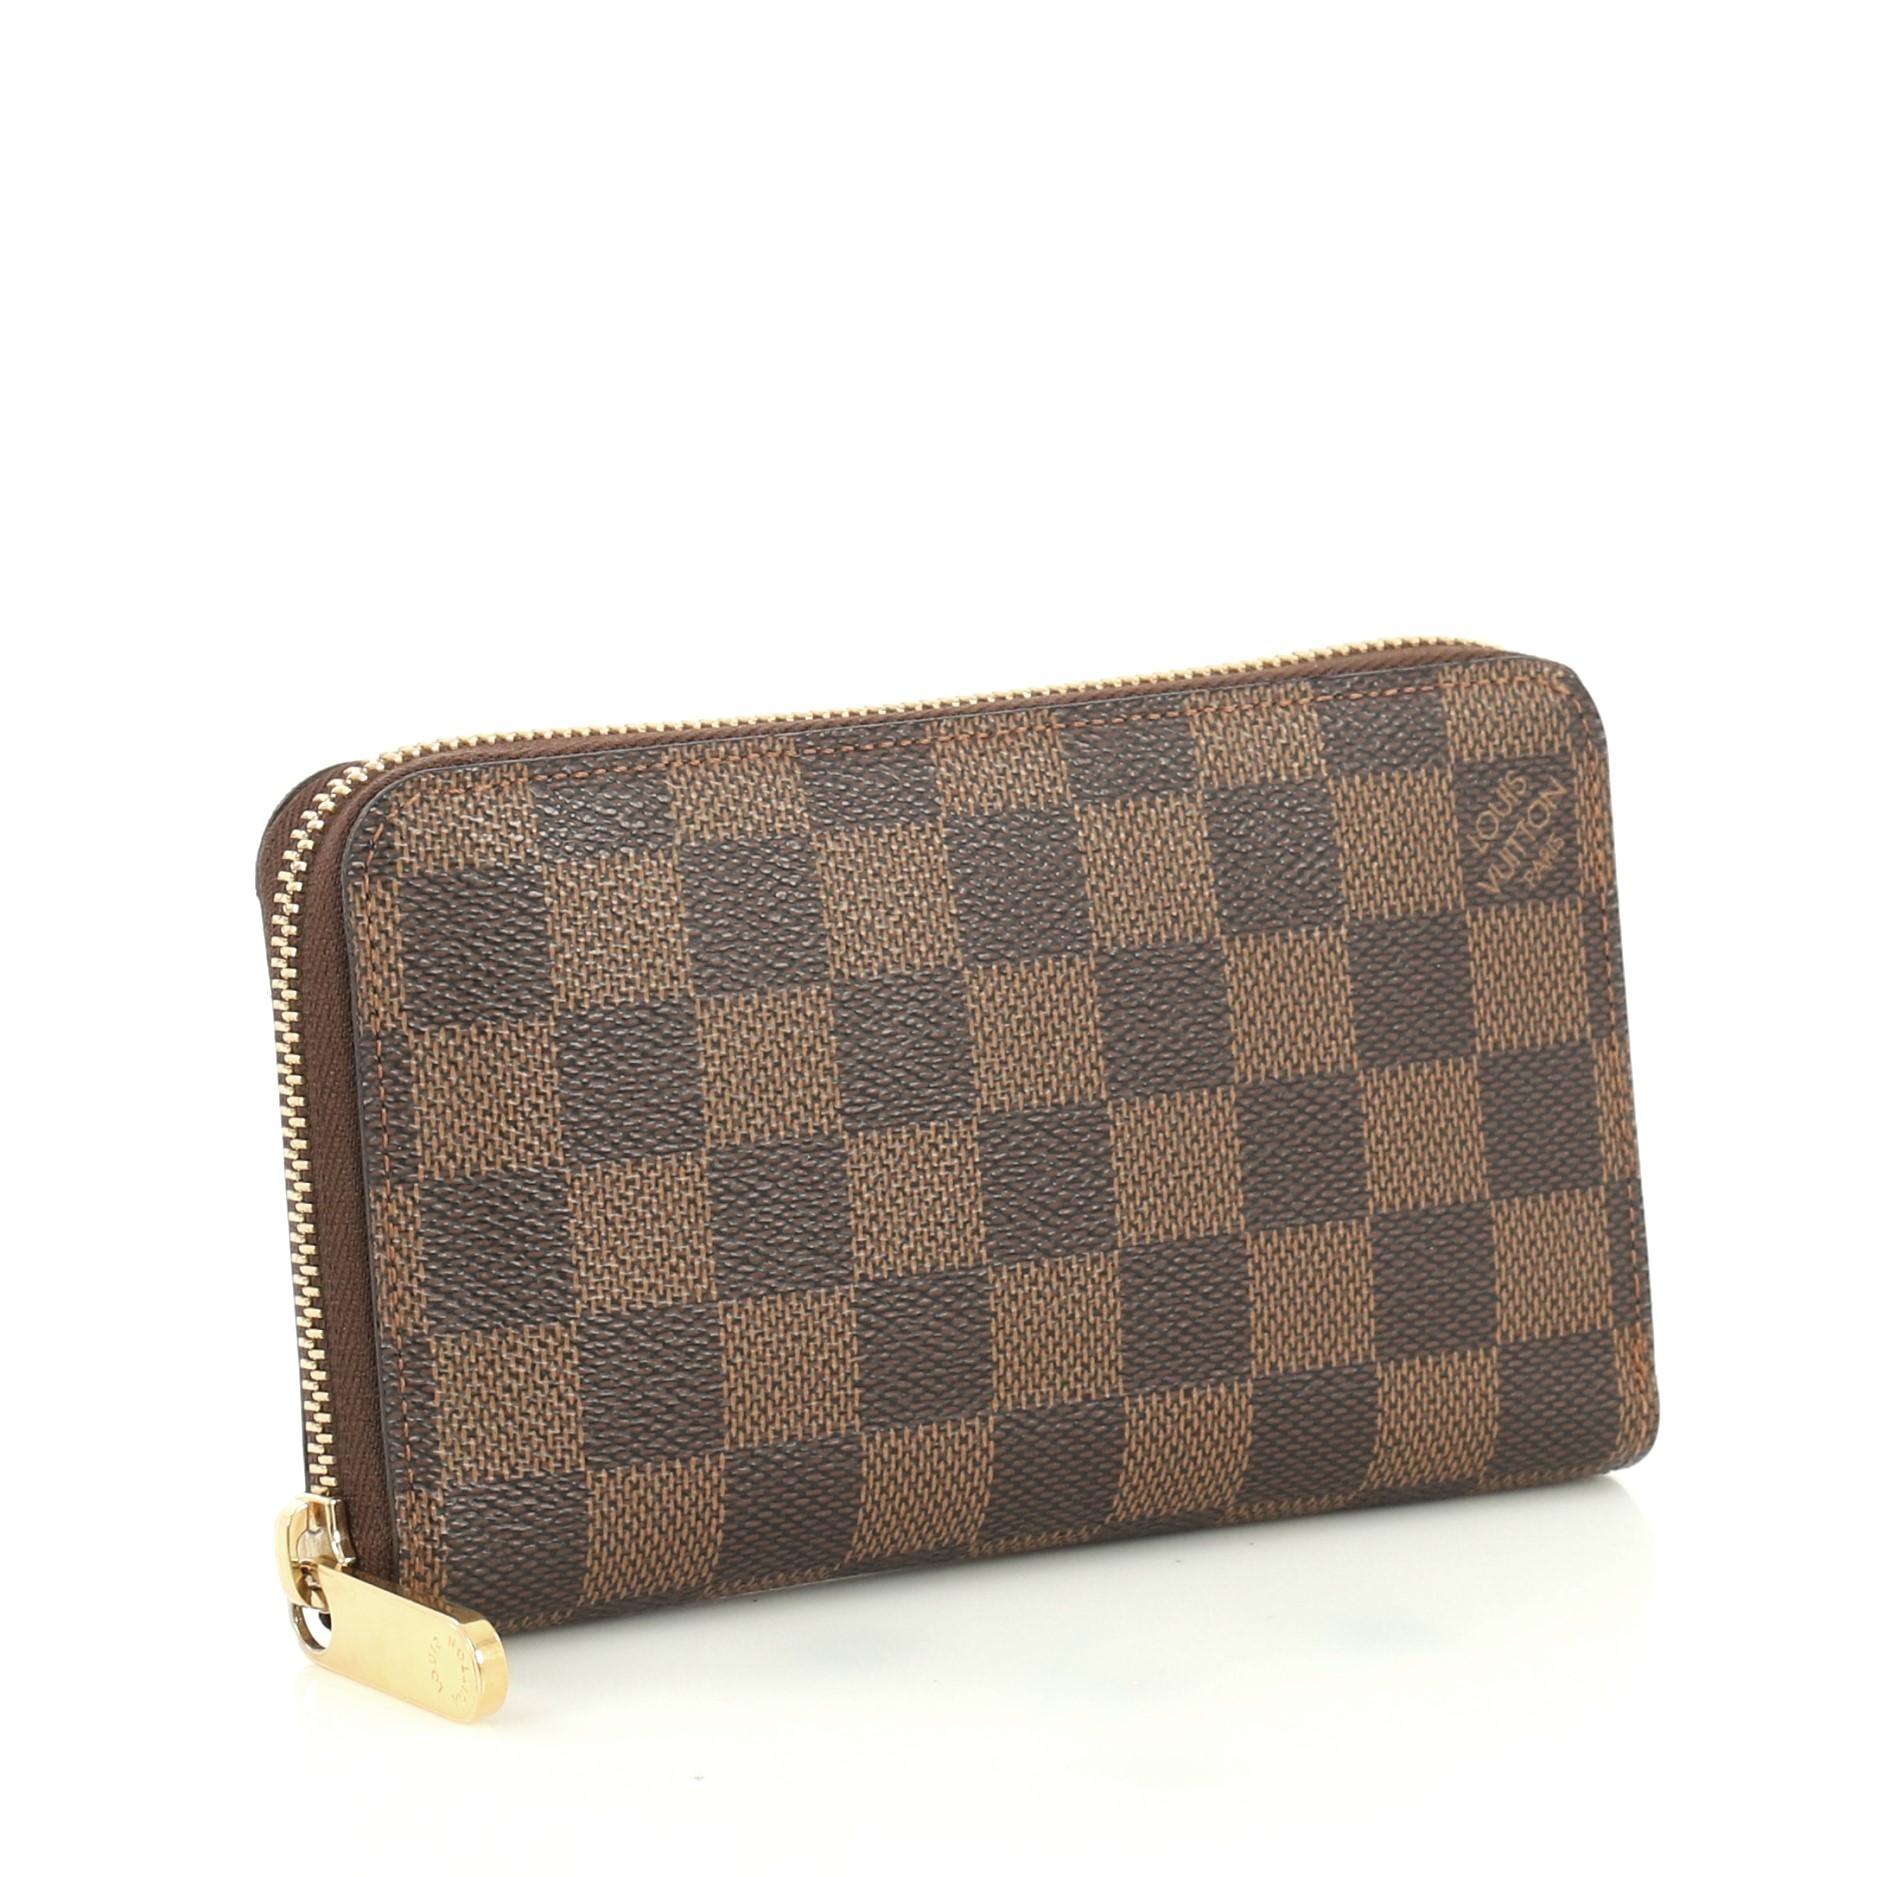 This Louis Vuitton Zippy Compact Wallet Damier, crafted from damier ebene coated canvas, features gold-tone hardware. Its zip-around closure opens to a brown leather interior with multiple card slots,zip pocket, and slip pockets. Authenticity code